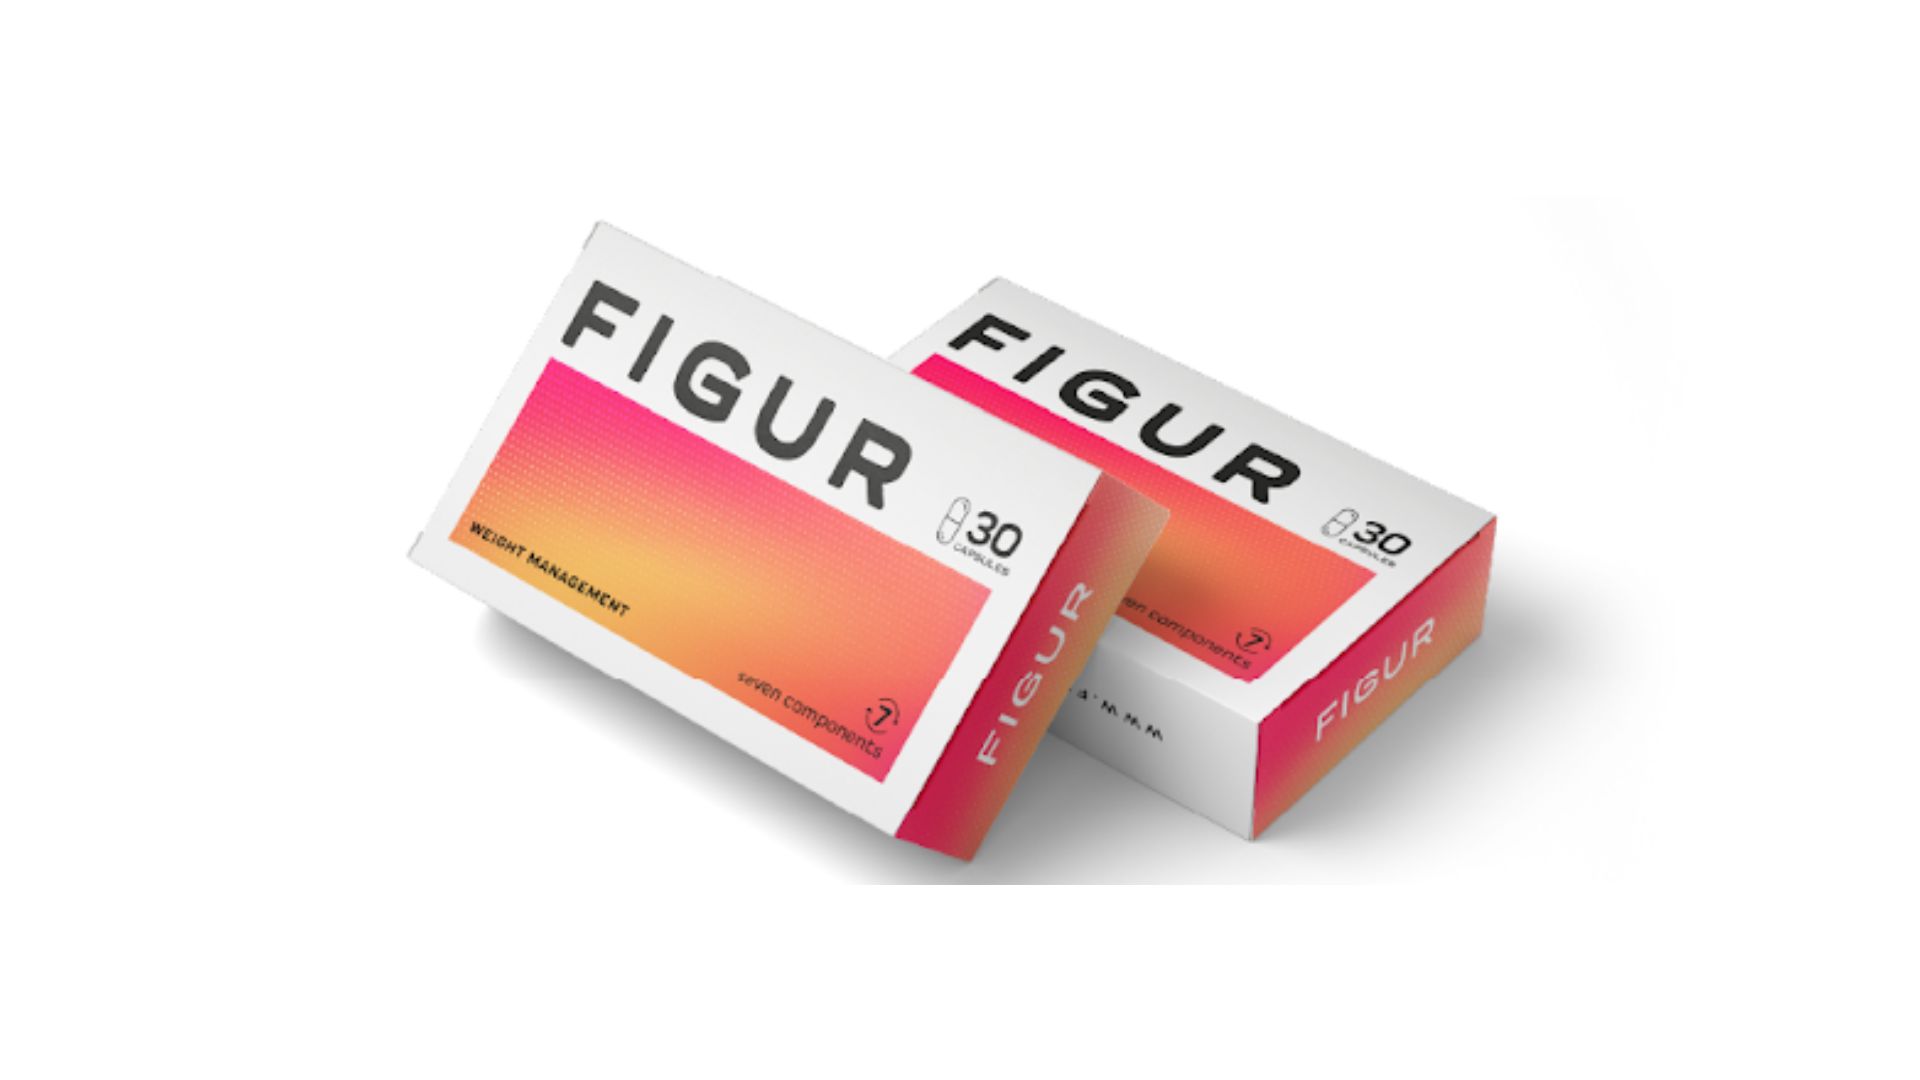 Figur Weight Loss Pills Reviews – An Honest Take On The Efficacy and Usage For Consumers